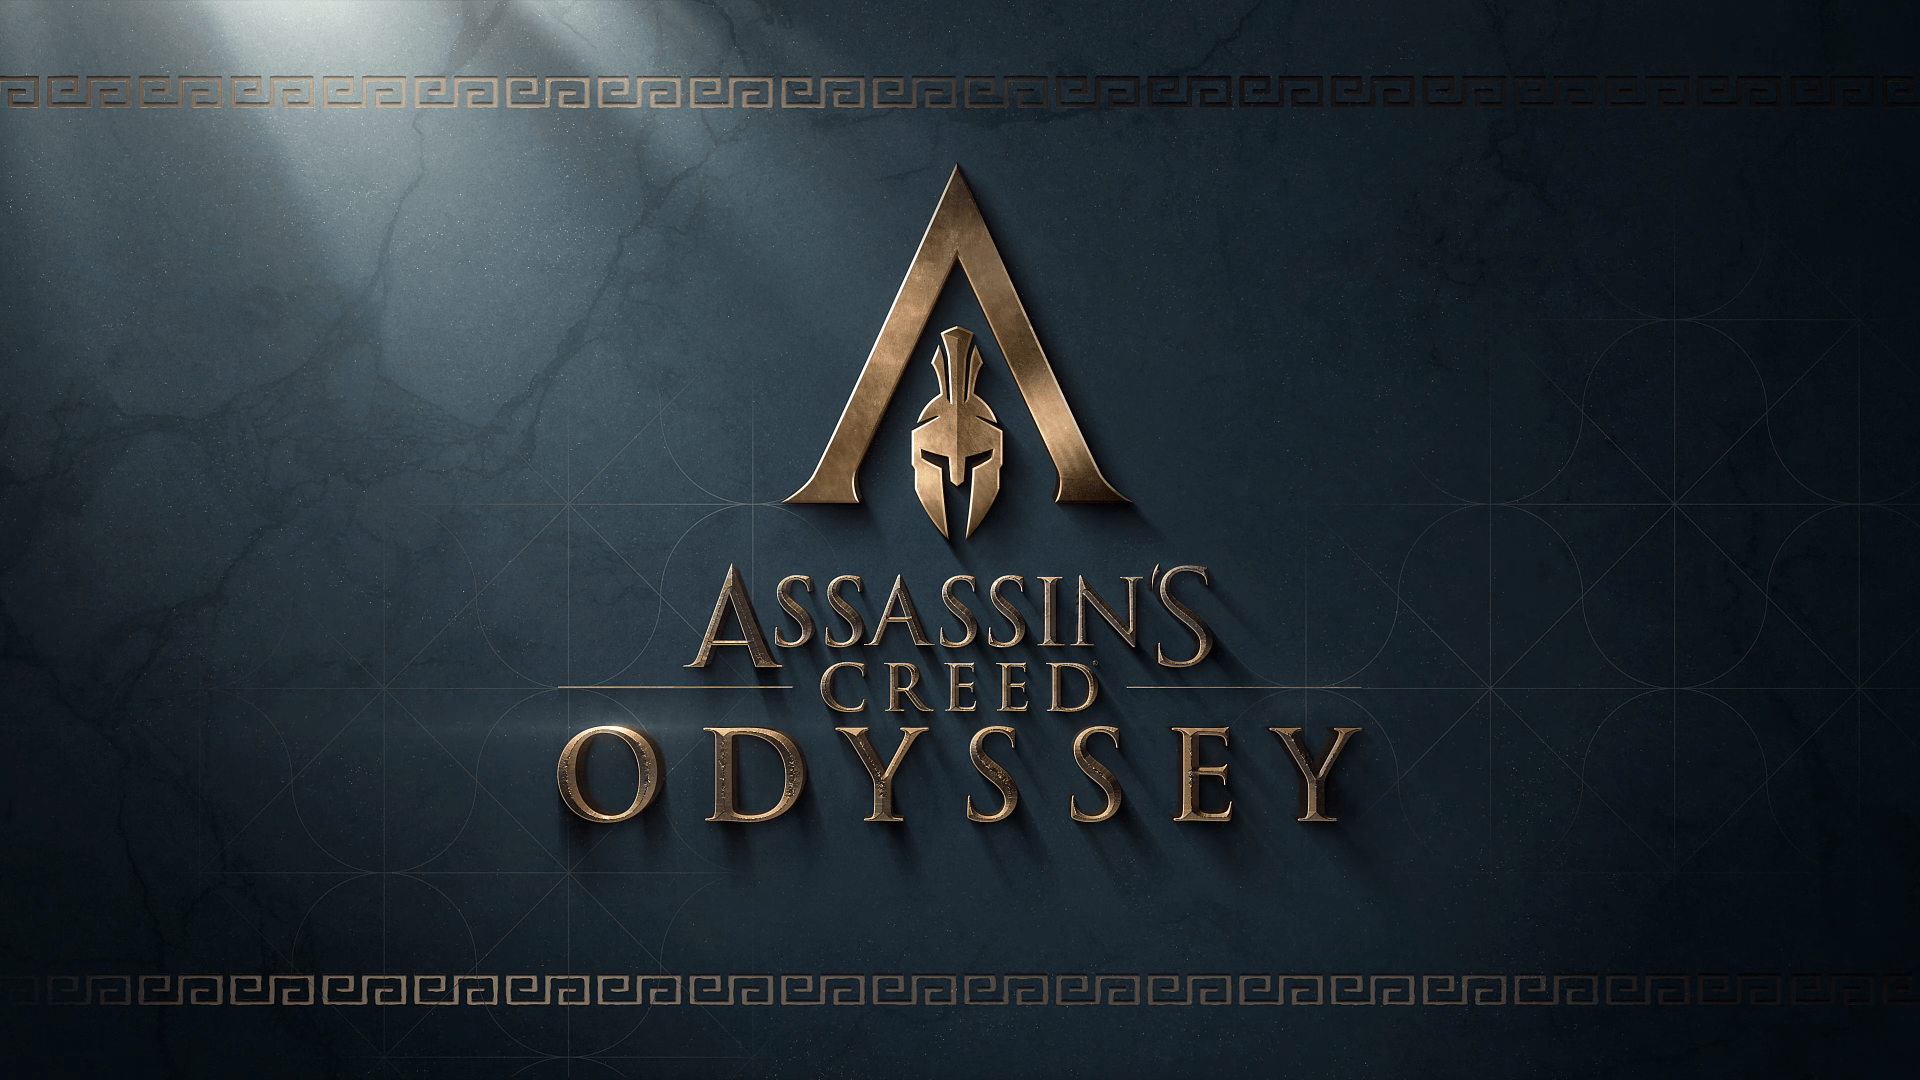 Assassin's Creed, Odyssey, Video Game HD Wallpapers